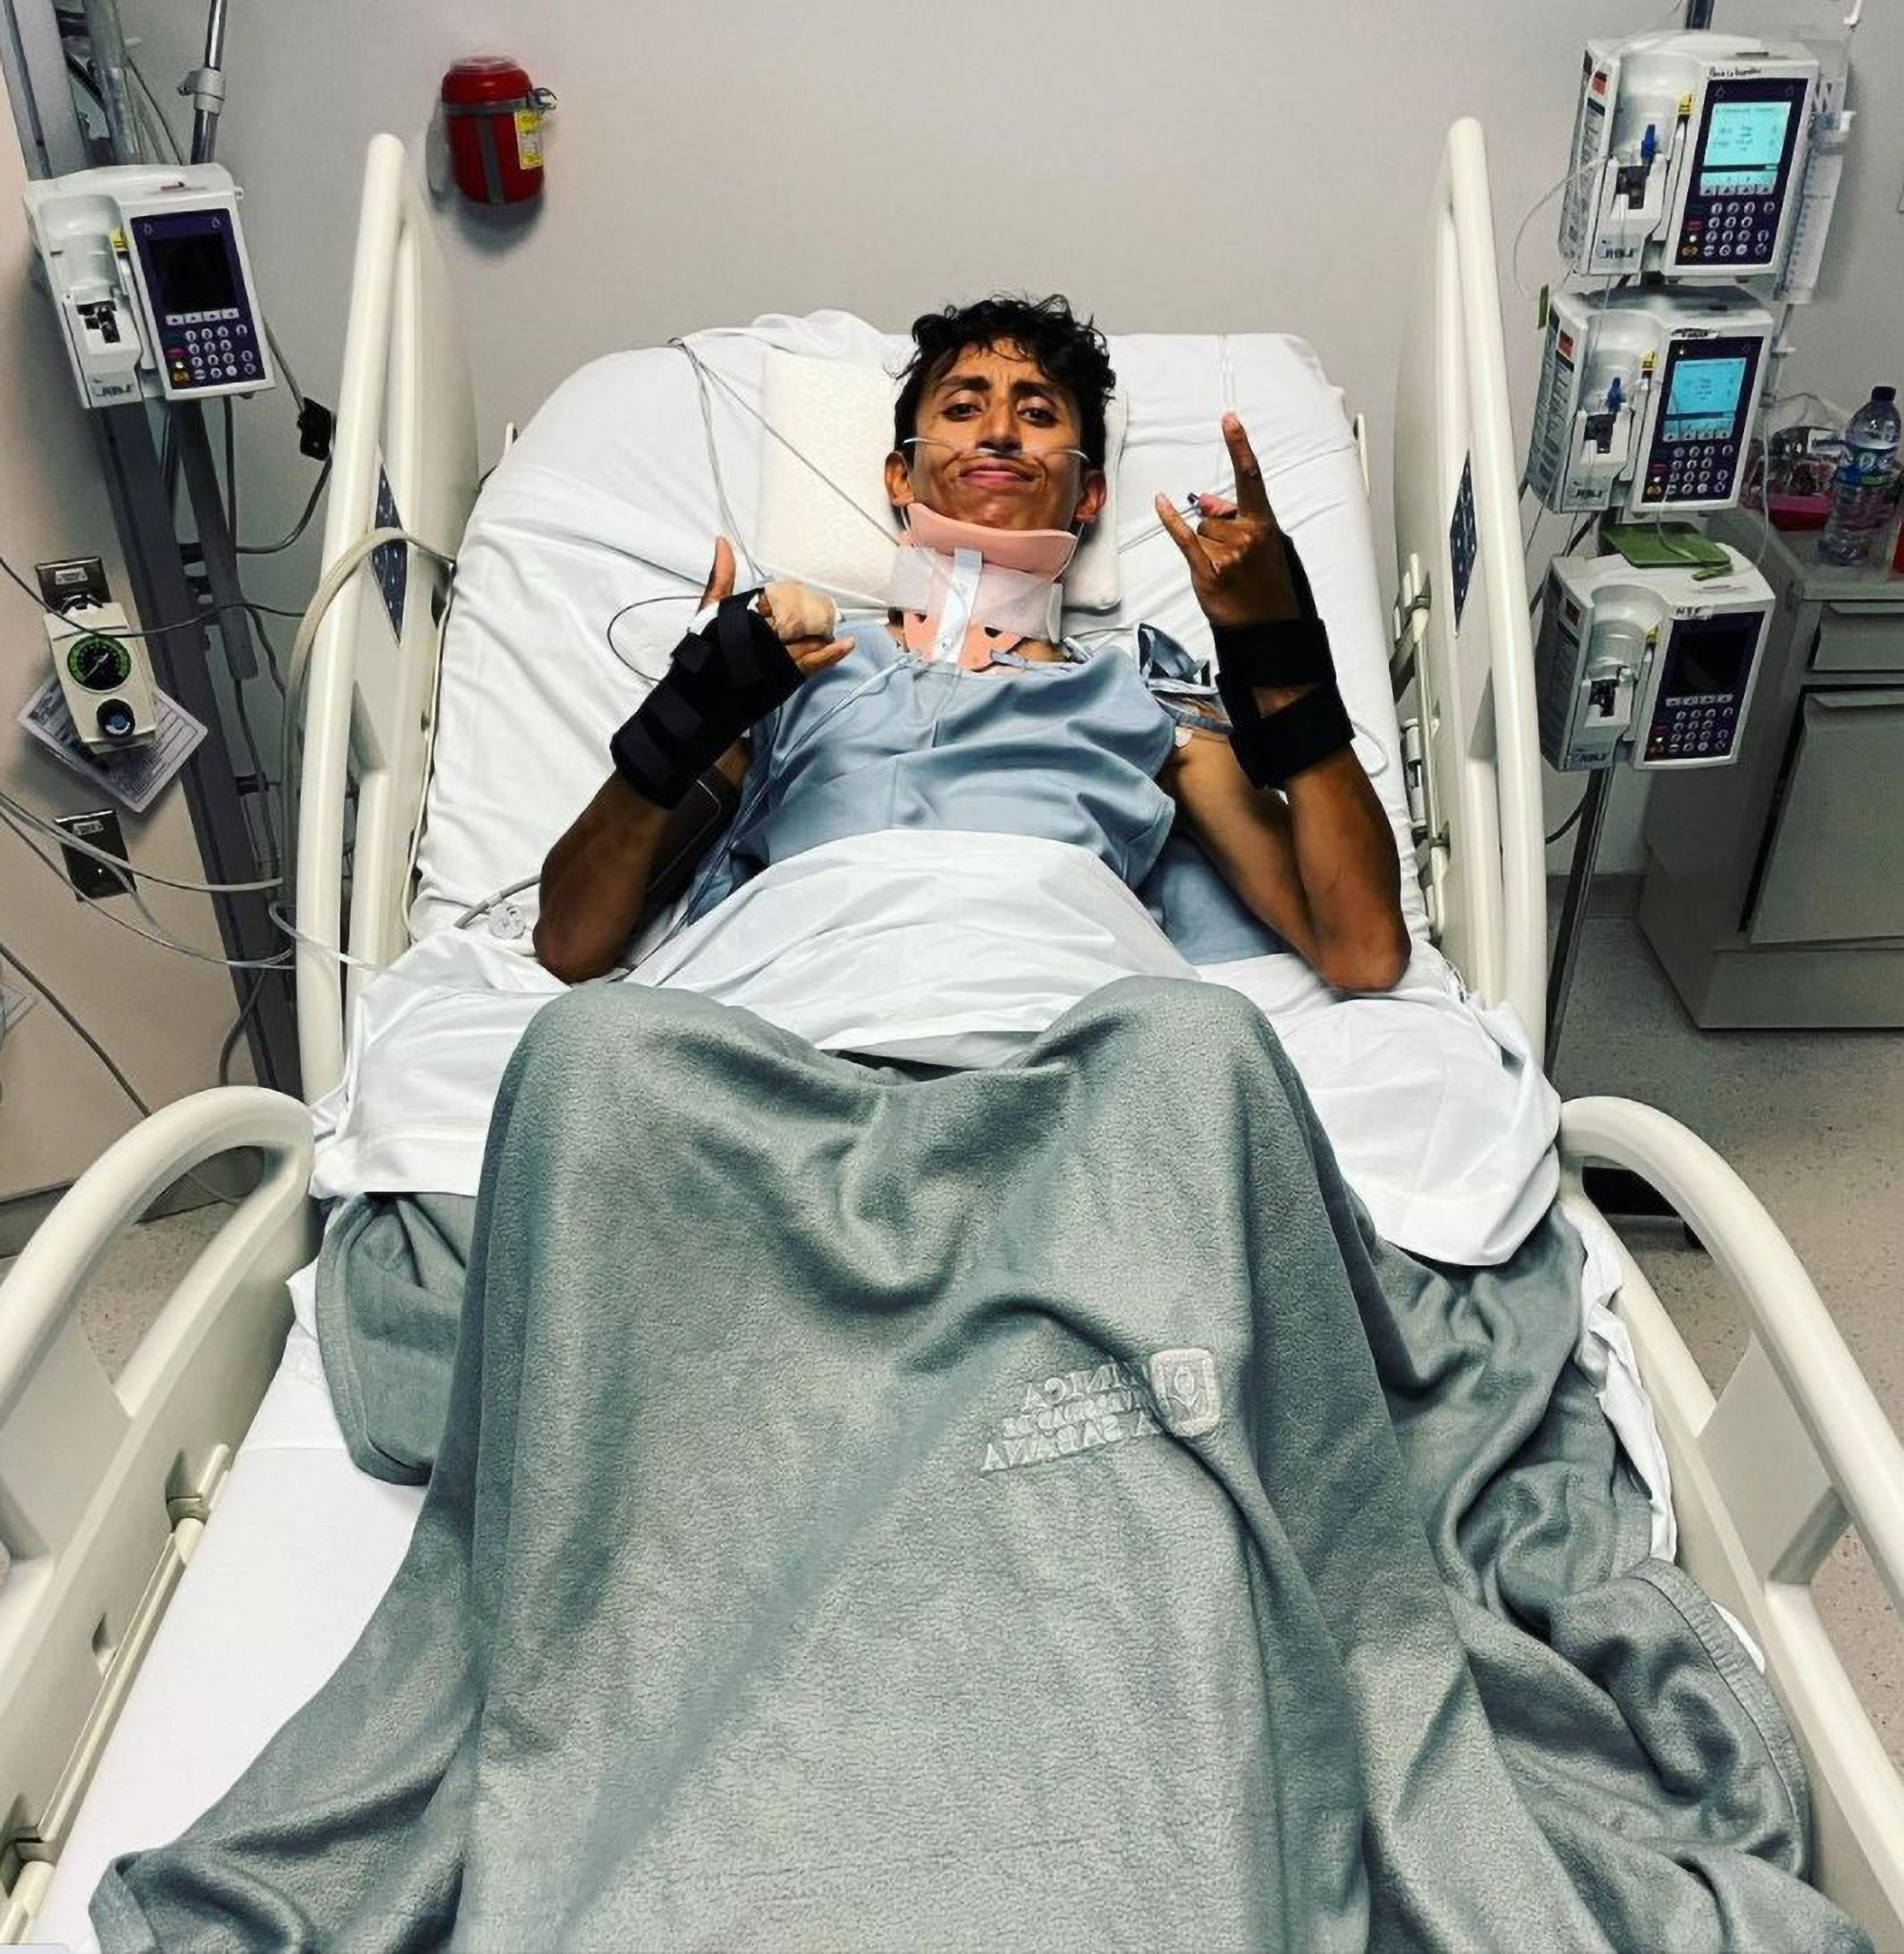 Read more about the article Colombian Champion Cyclist Who Nearly Died In Crash With Bus Posts Upbeat Message From Hospital Bed Following Successful Op